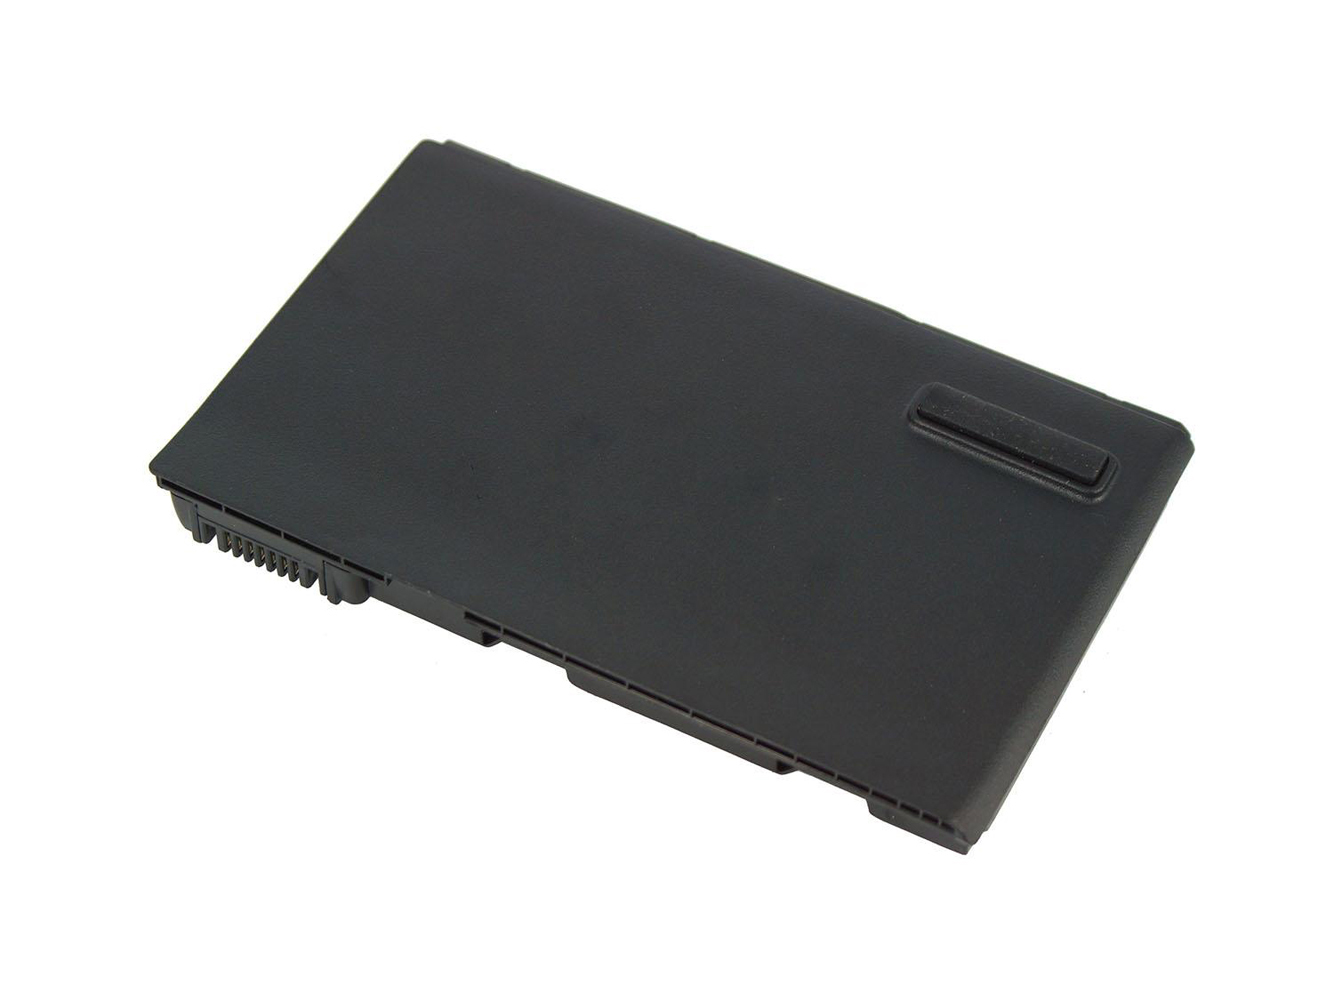 Replacement for ACER Extensa 5230, 5420, 5610, 5610G, 5620, 7620Z, Travelmate 5330, ACER Extensa 5210, 5220, 5420G, 5620Z, 5630, 5630G, 7220, 7620, 7620G Series, TravelMate 5220, 5220G, 5230, 5310, 5320, 5520, 5520G, 5530, 5530G, 5710, 5710G, 5720, 5720G,